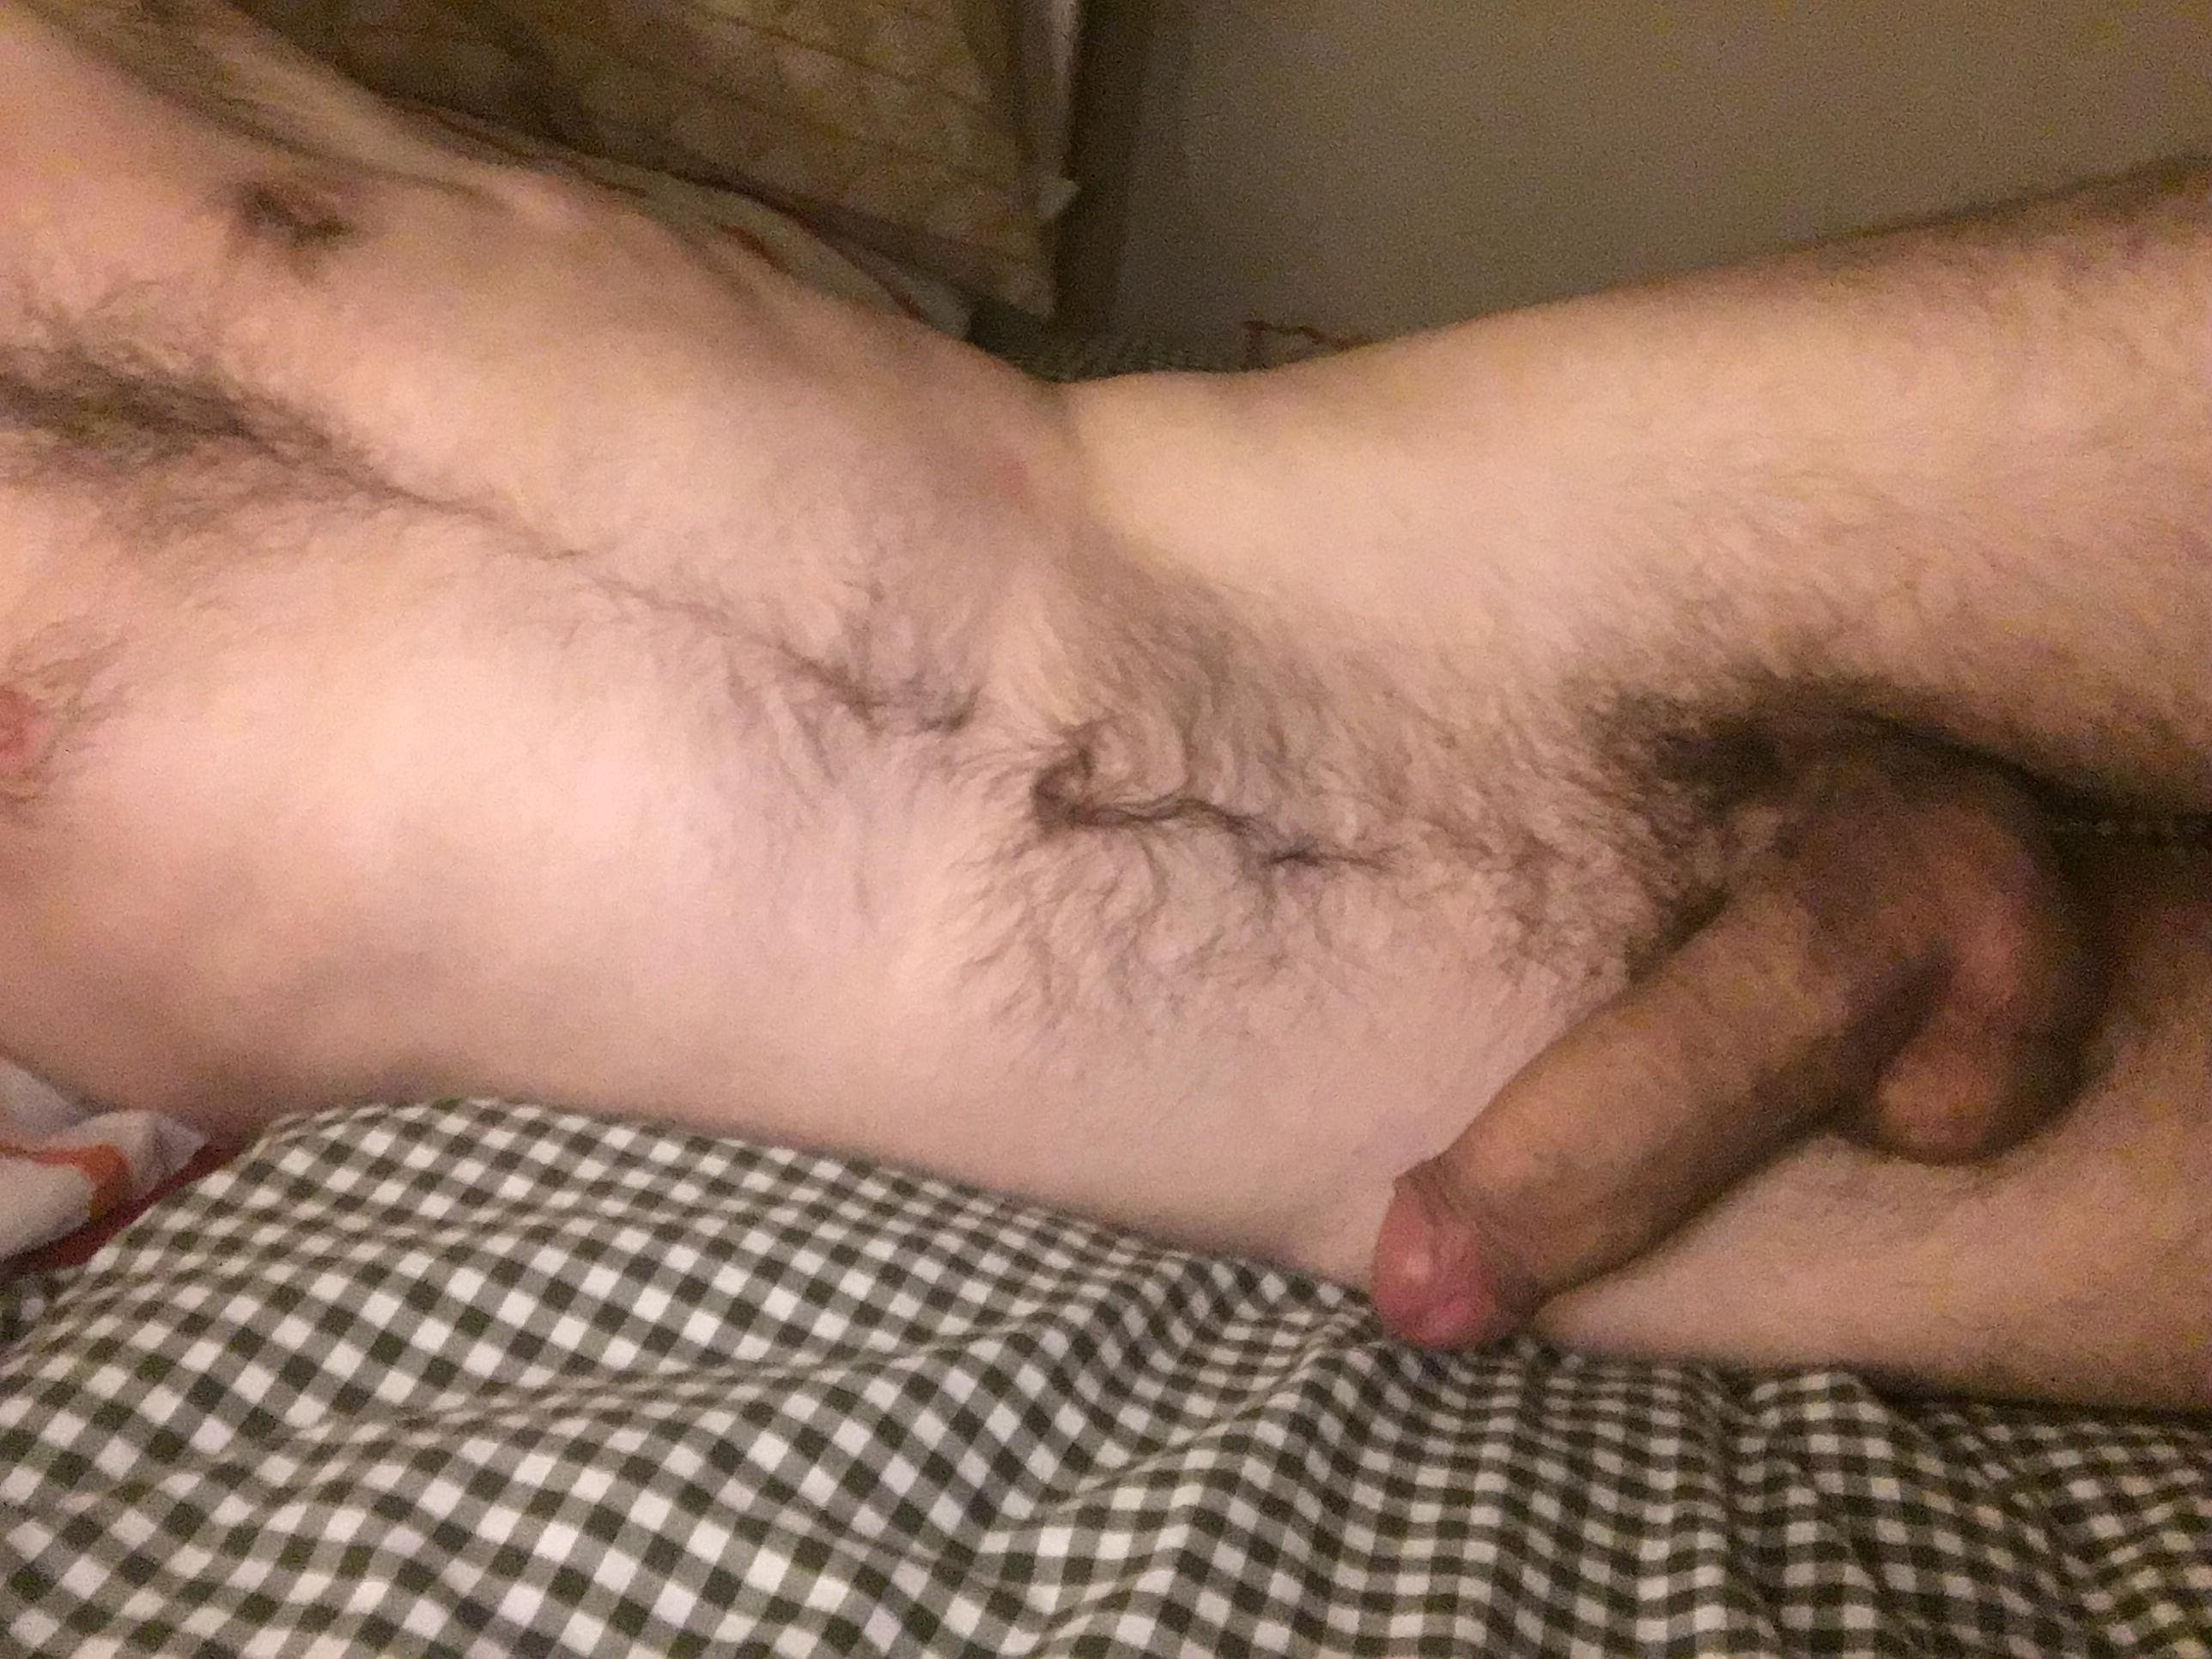 Horny & hairy (DMs welcome)